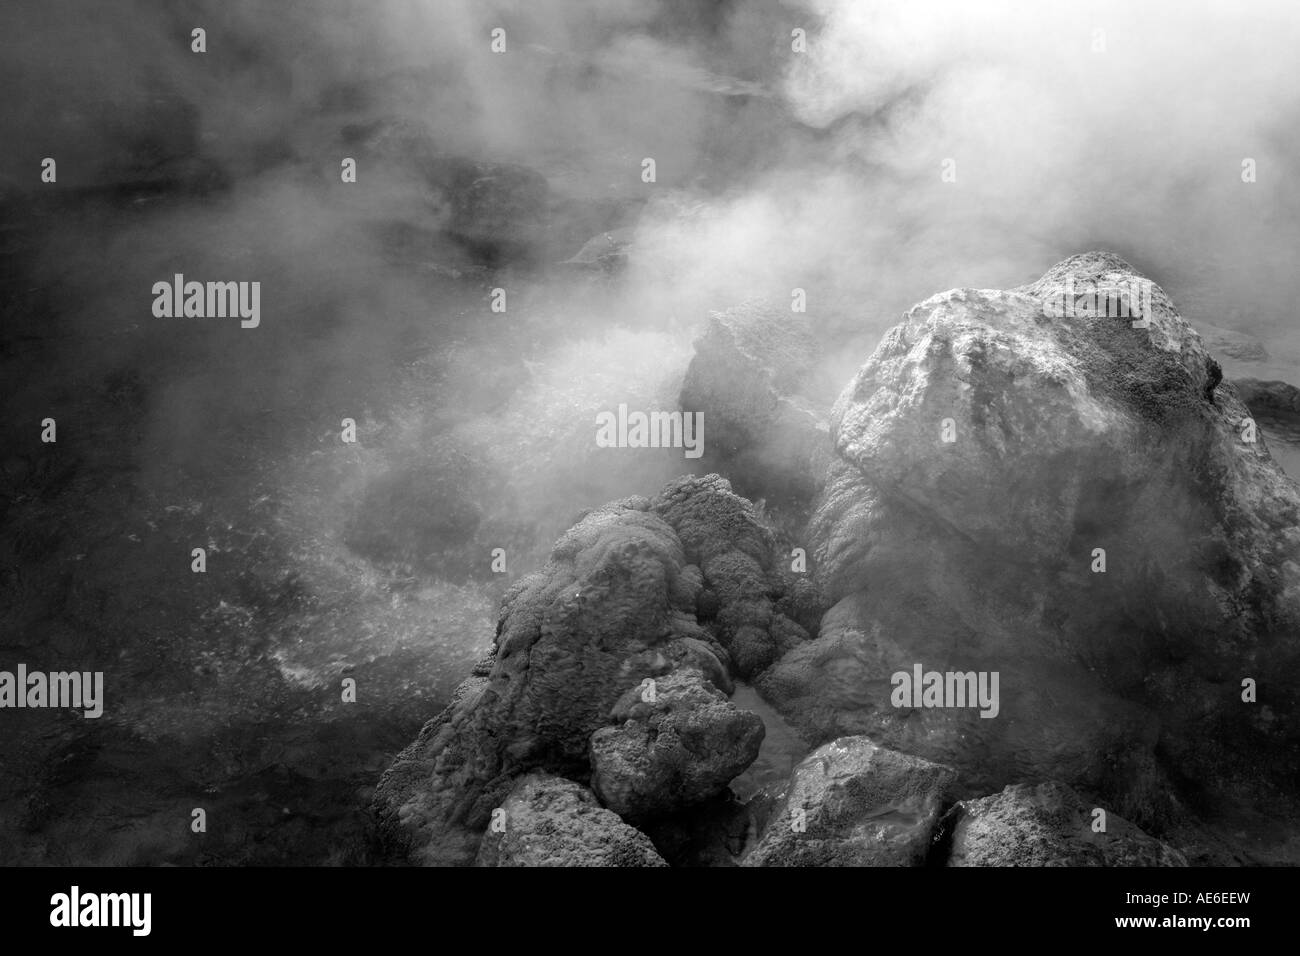 Steam rises from the hotsprings of Furnas. Sao Miguel island, Azores, Portugal Stock Photo